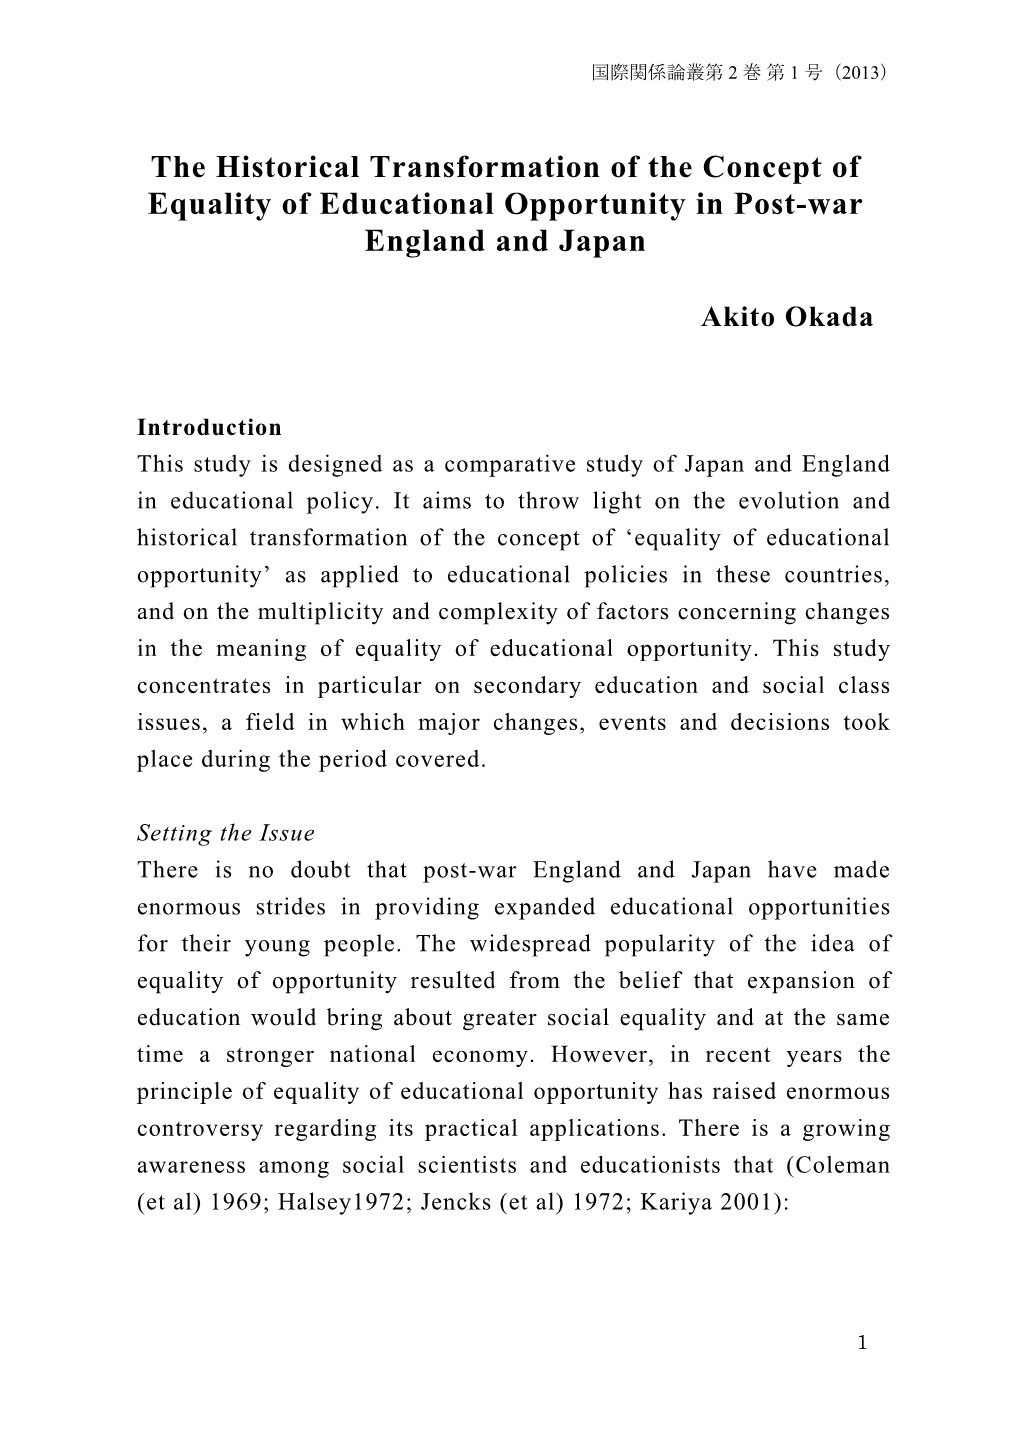 The Historical Transformation of the Concept of Equality of Educational Opportunity in Post-War England and Japan